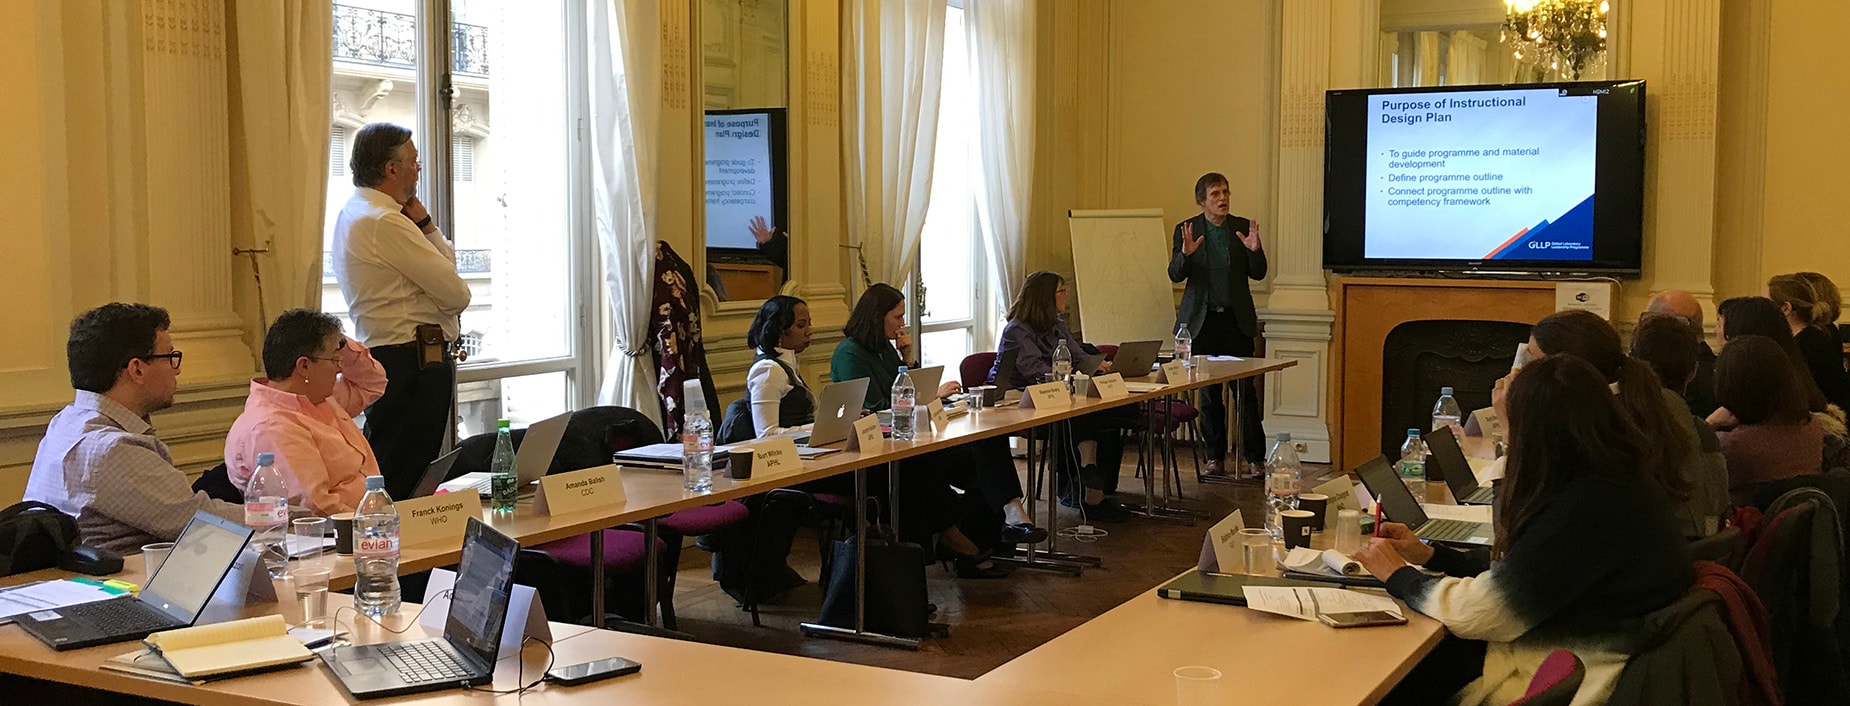 The GLLP partners meet in January 2019 at OIE Headquarters in Paris. Photo: Alex Ginzberg